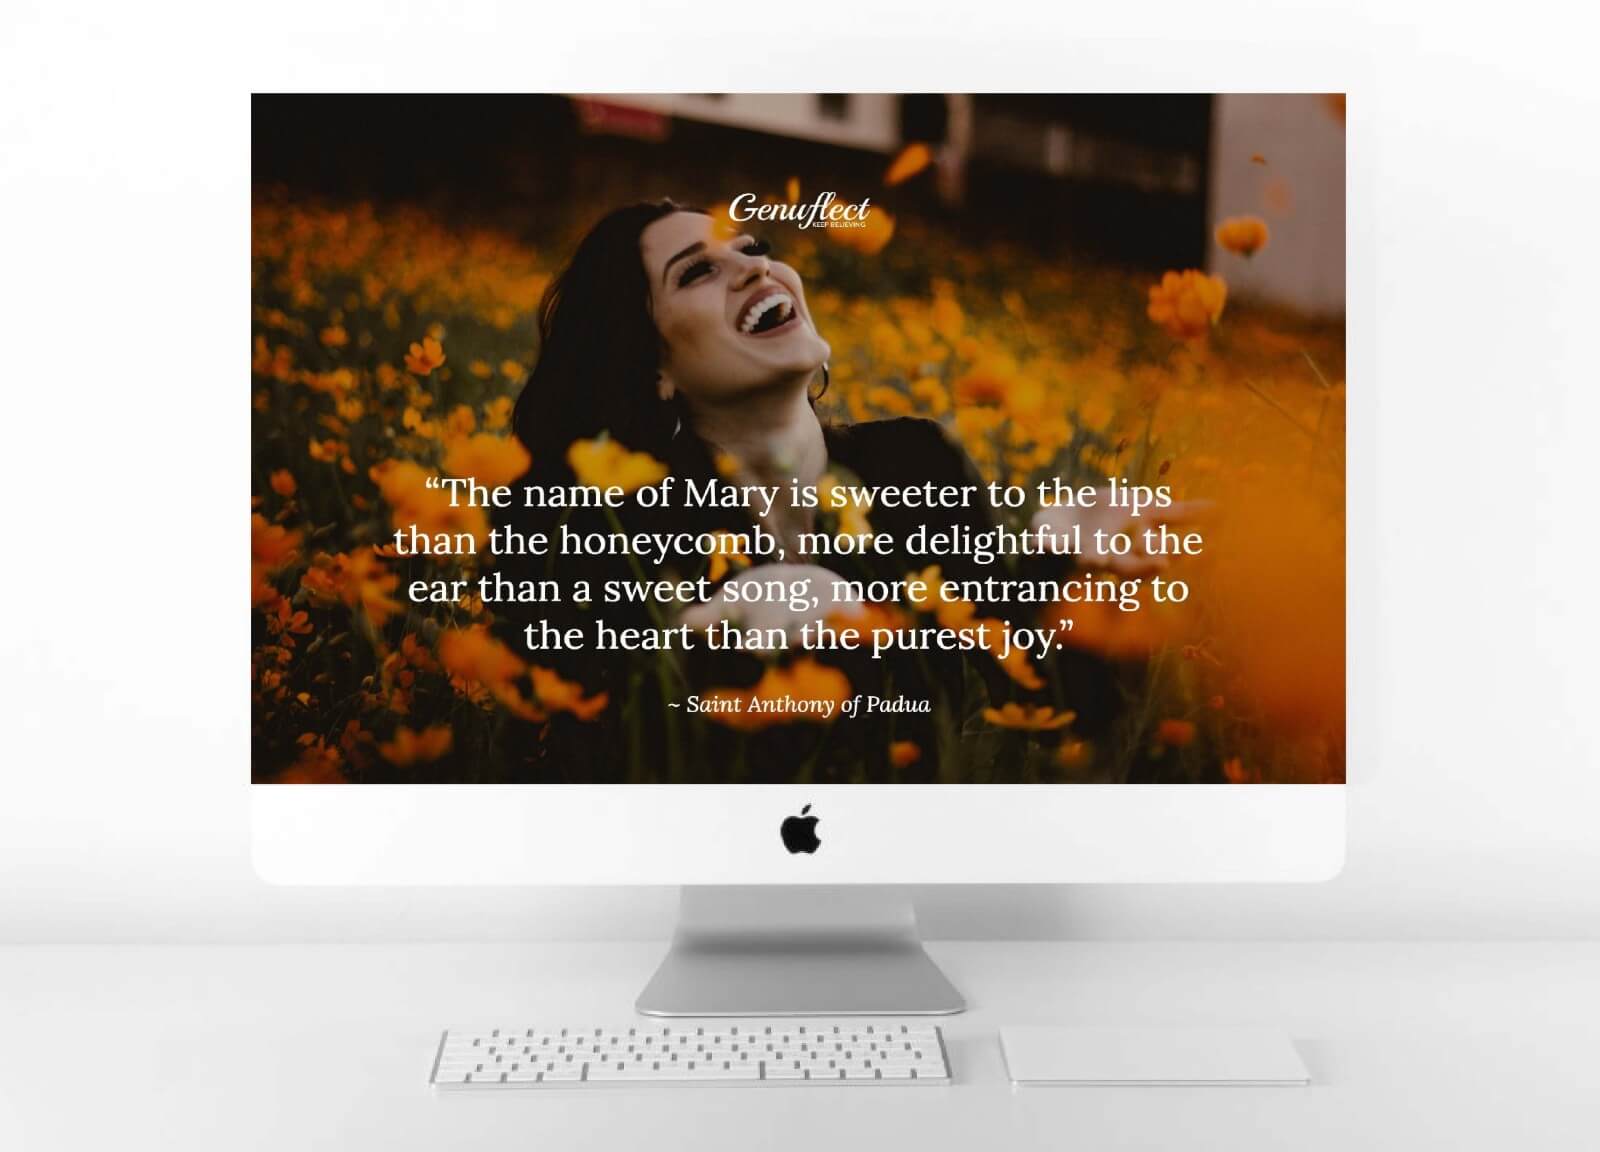 Genuflect computer background image of a Woman outside in a field of orange flowers looking up to the sky and smiling with joy